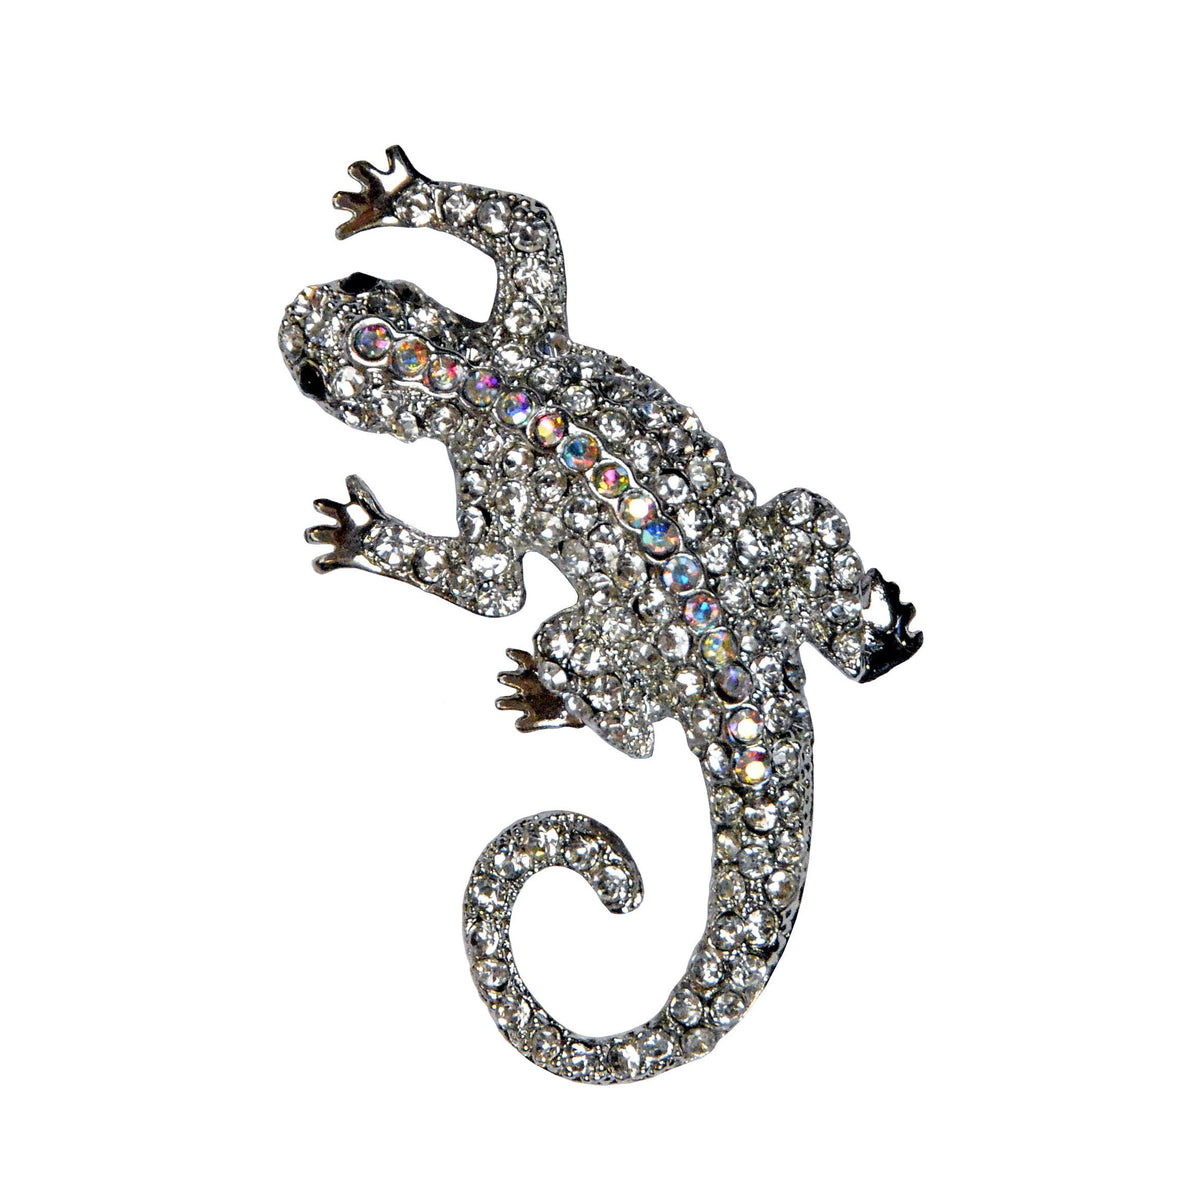 Rhinestone Brooch | Clear and Silver Lizard | from Pandemonium Millinery